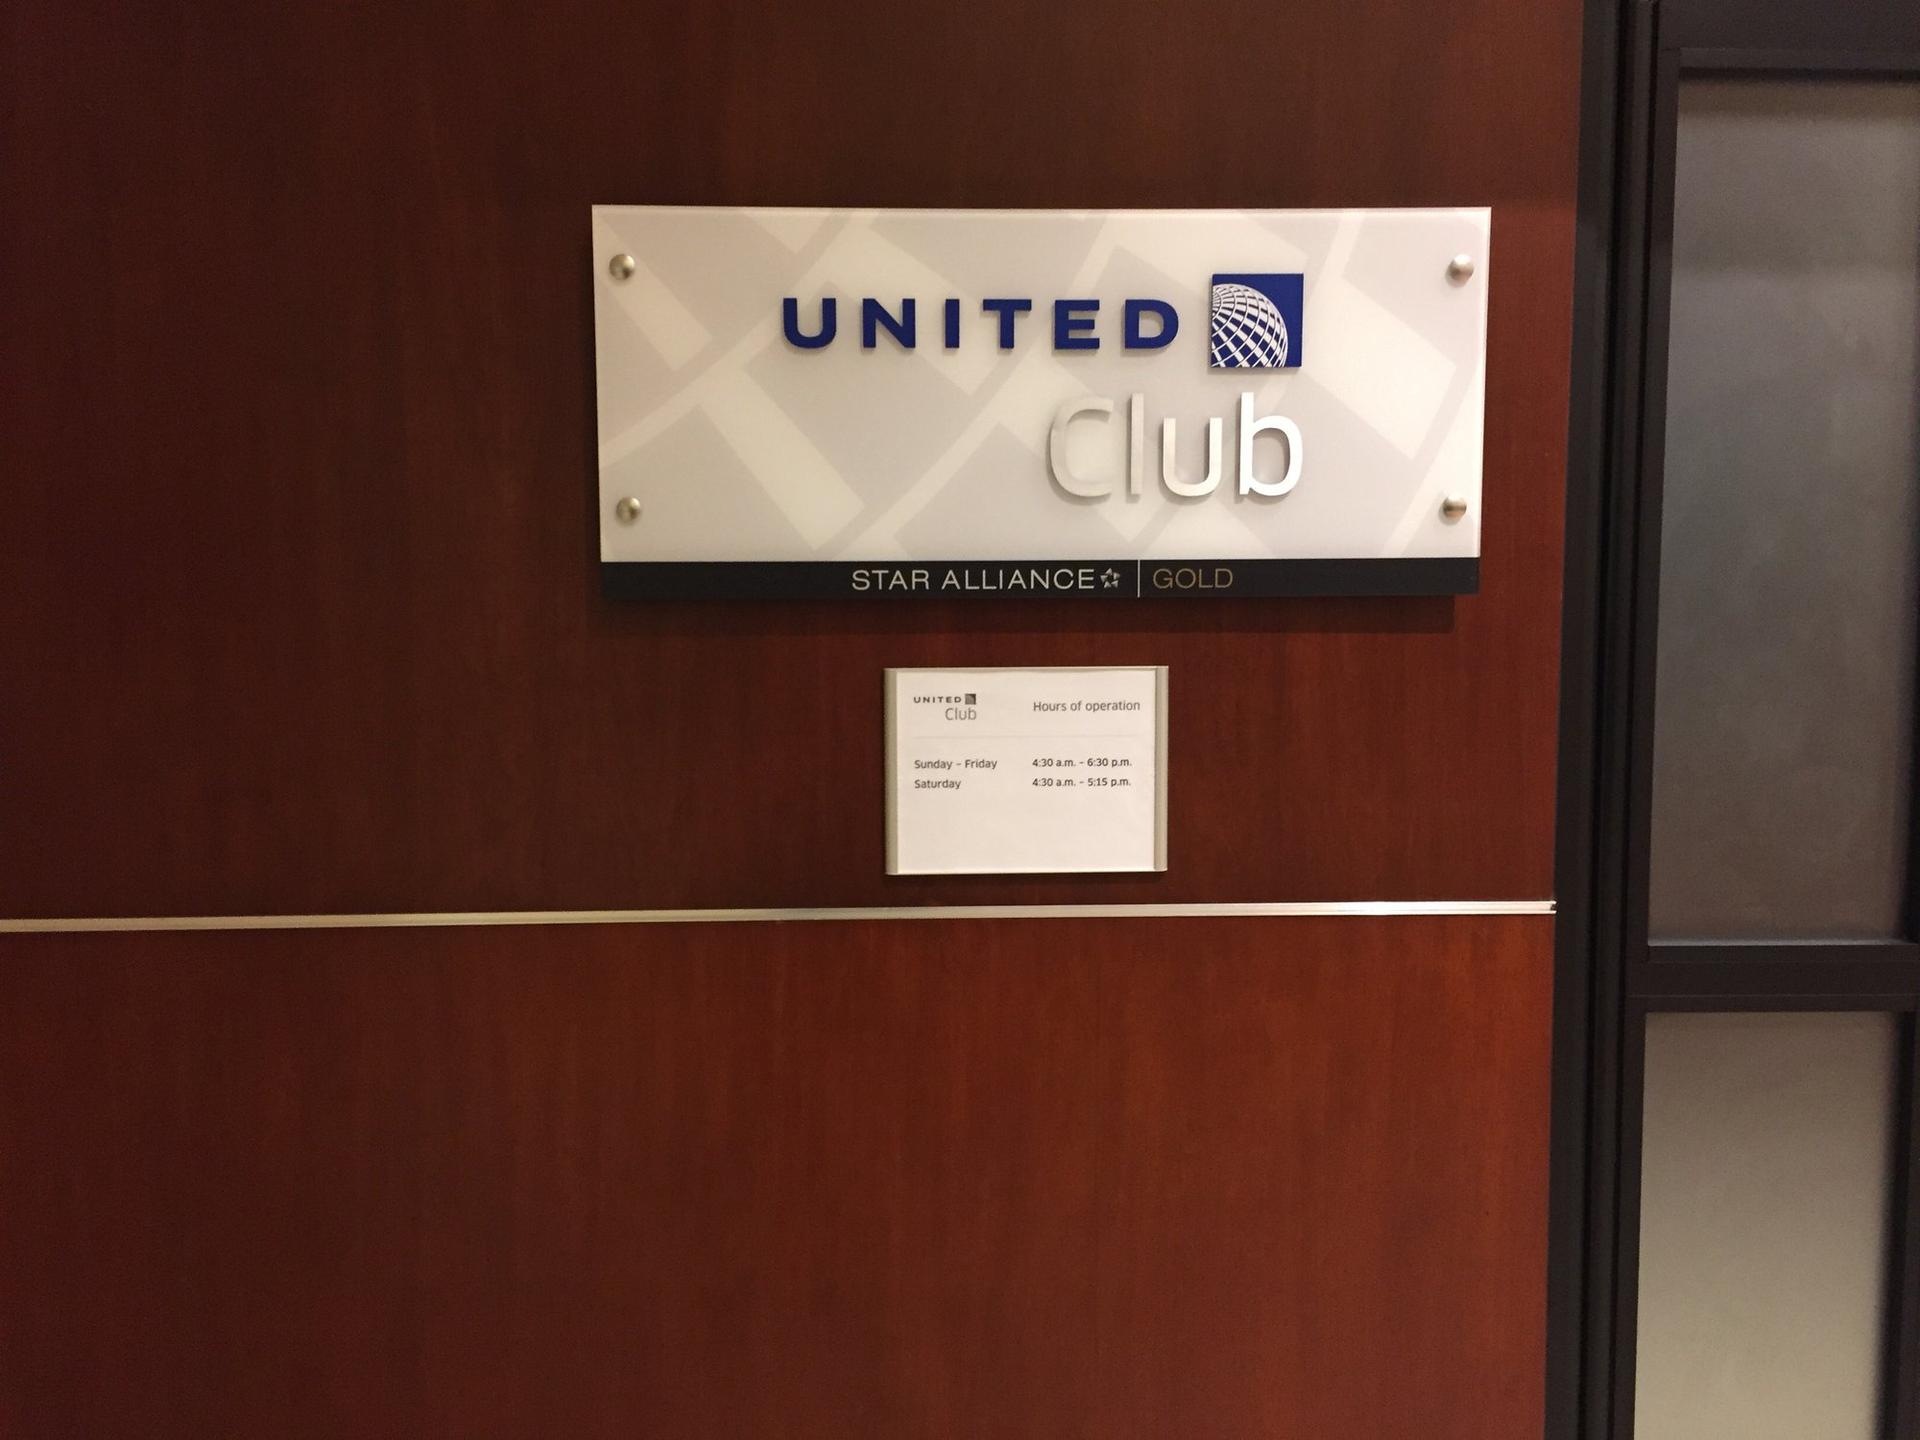 United Airlines United Club image 8 of 22